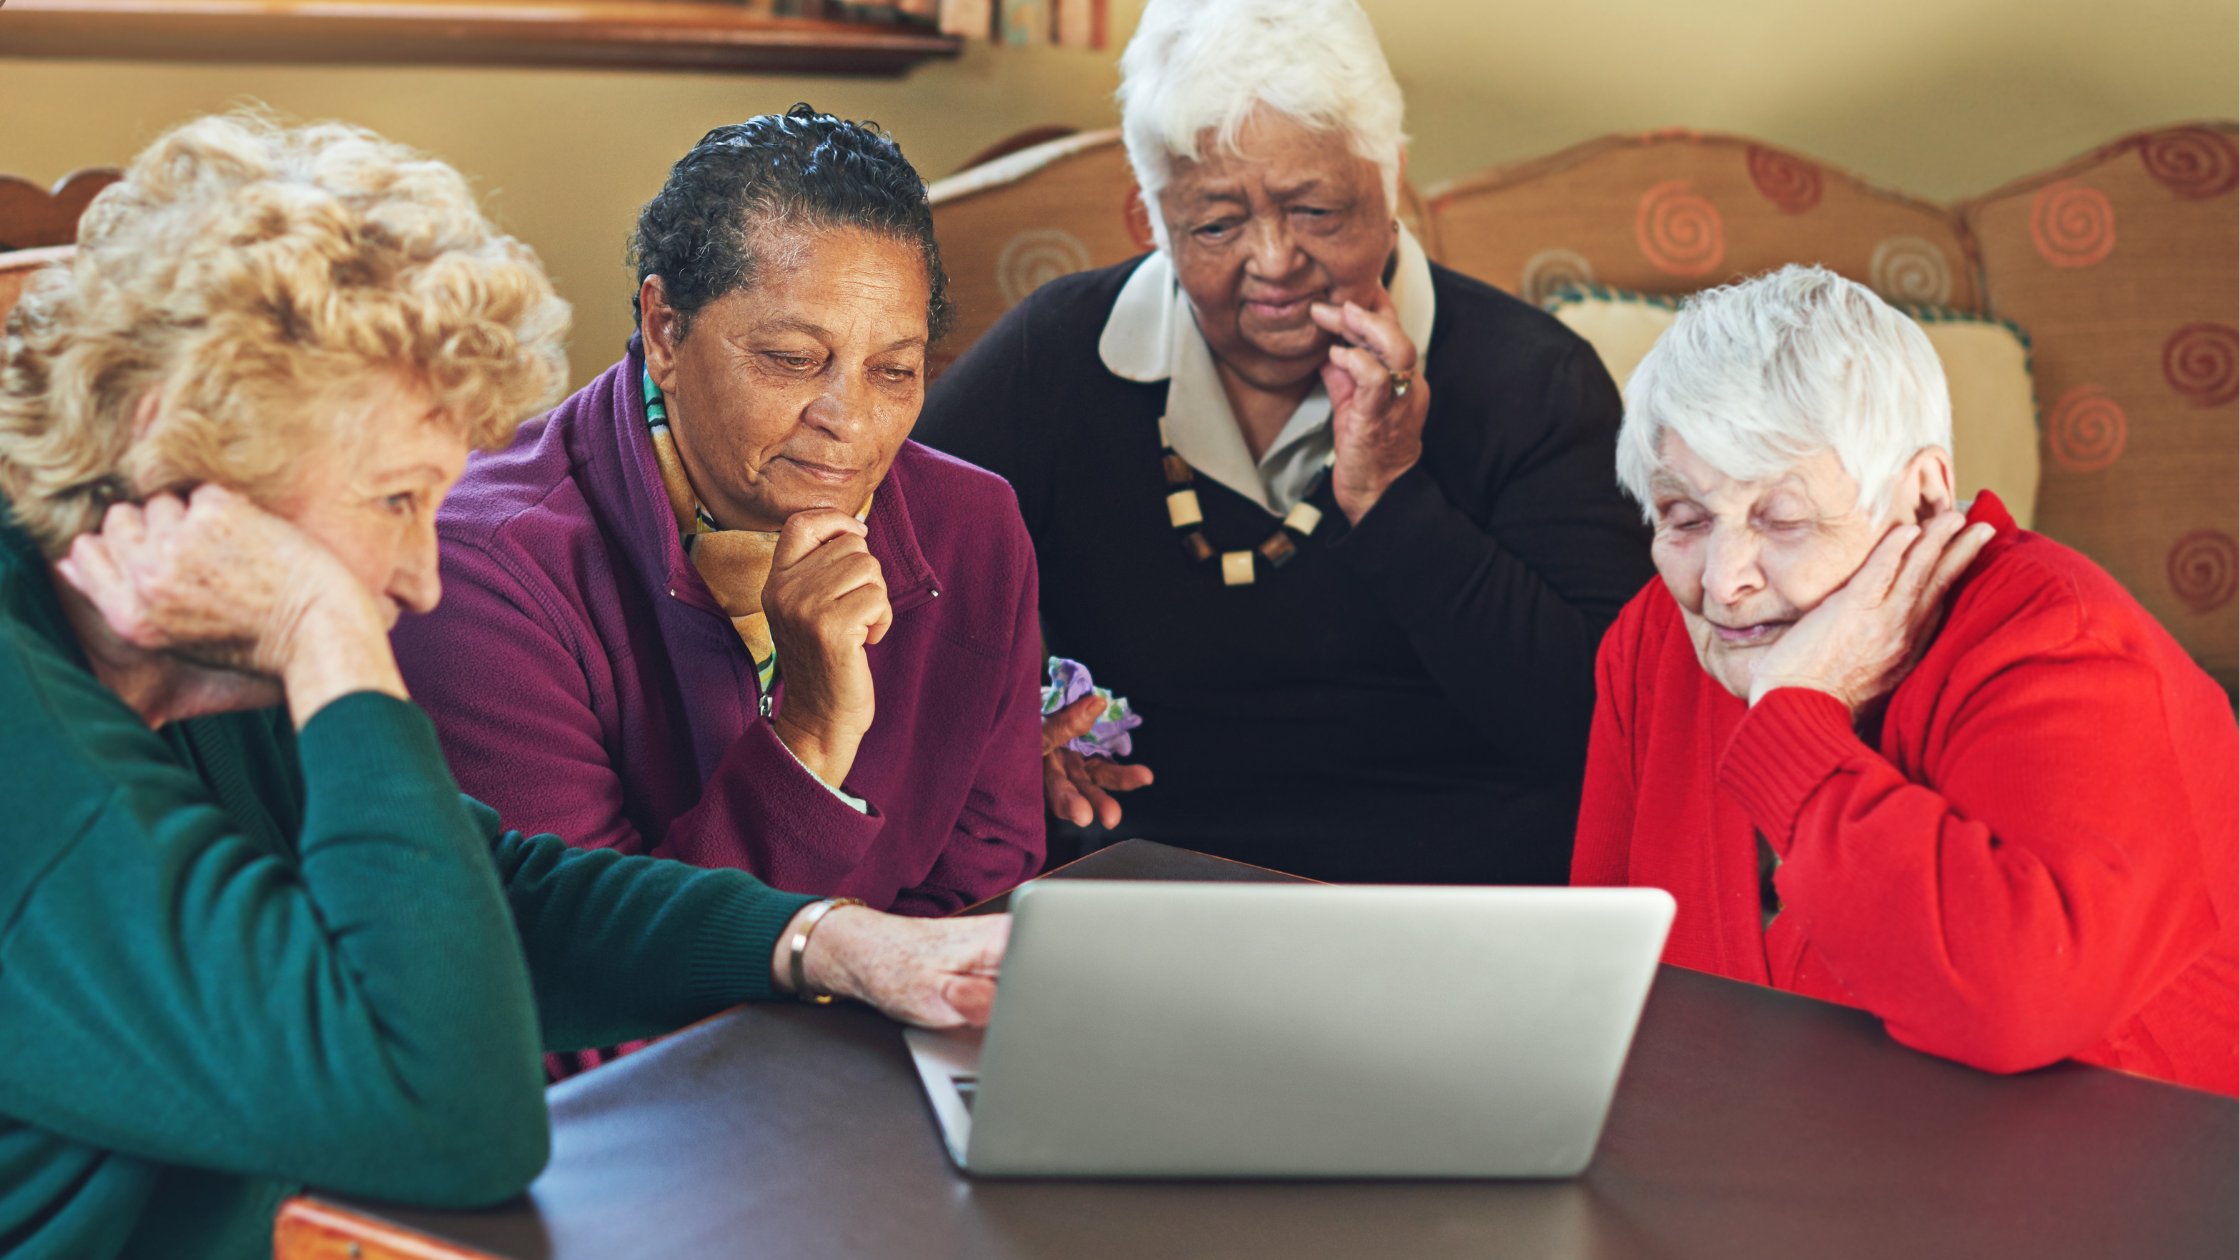 How to Help Older Adults to Adopt Health Technology